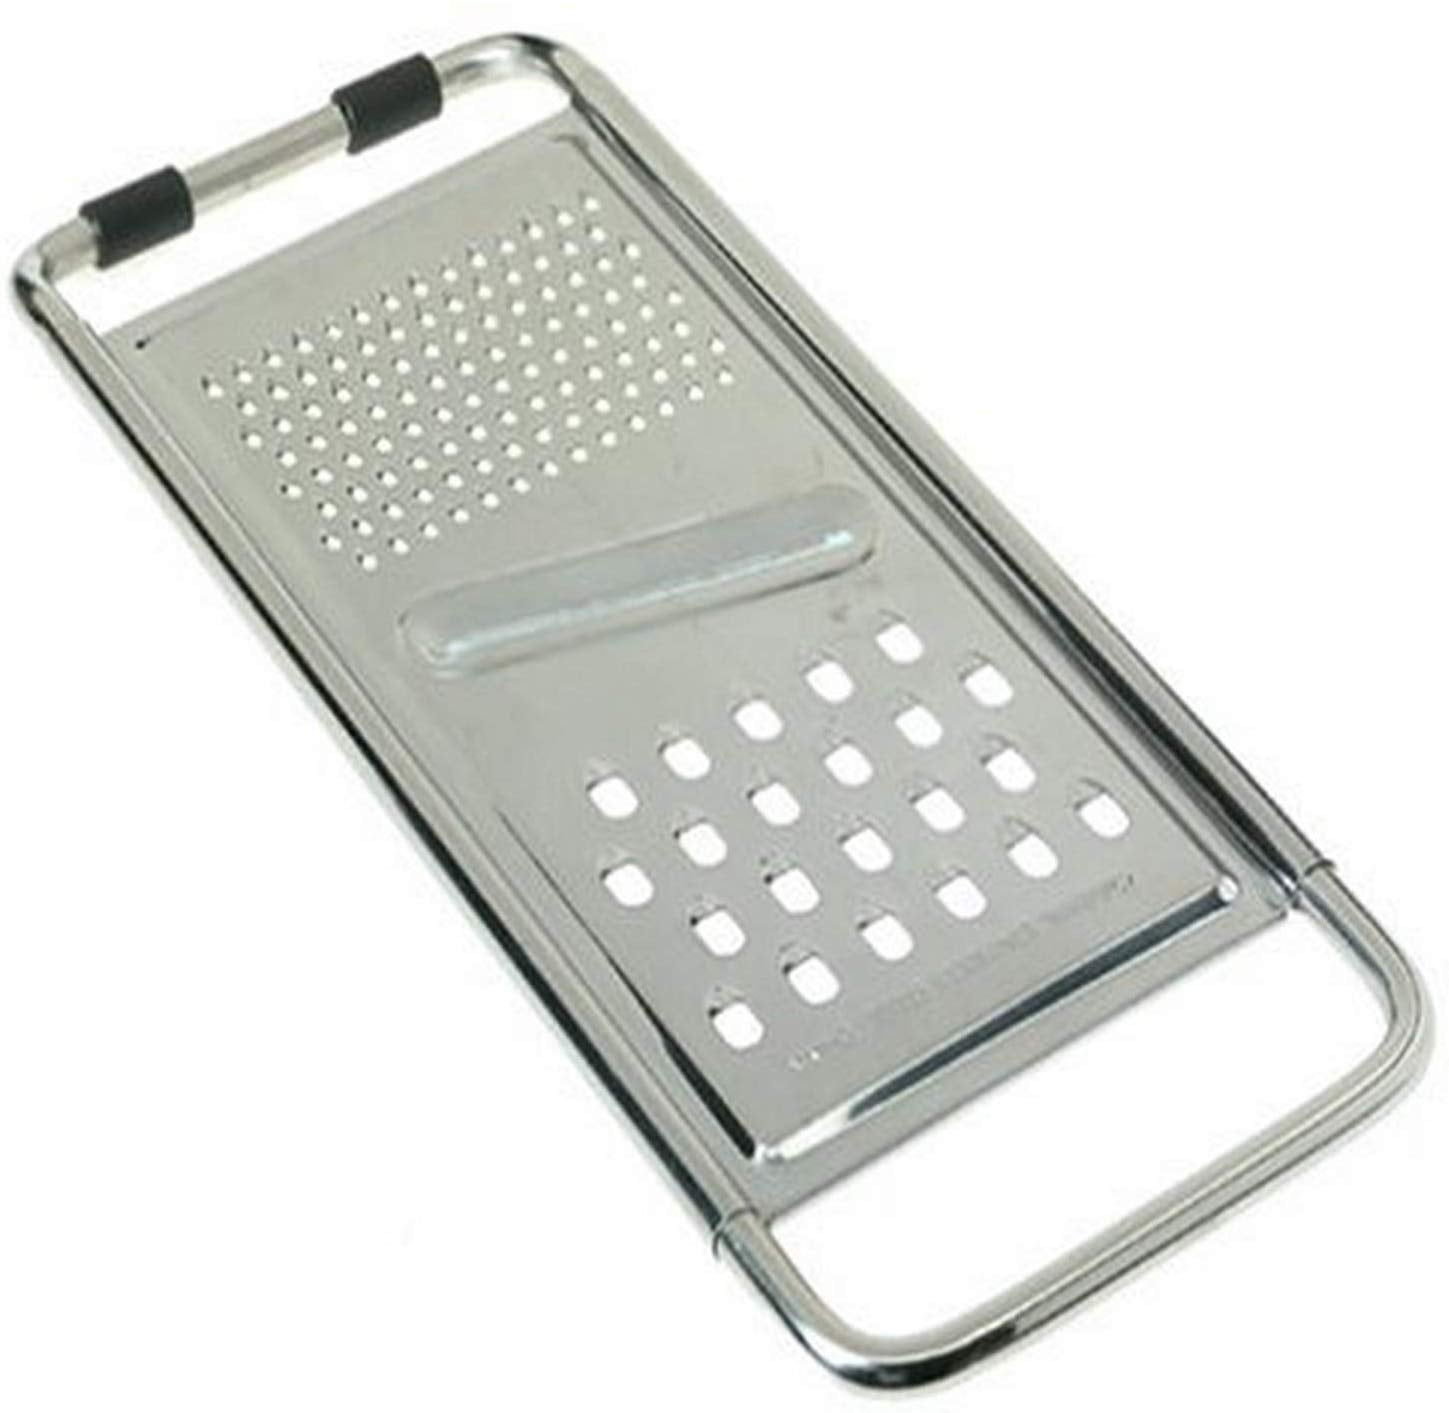 Zyliss Classic Cheese Grater - MyToque